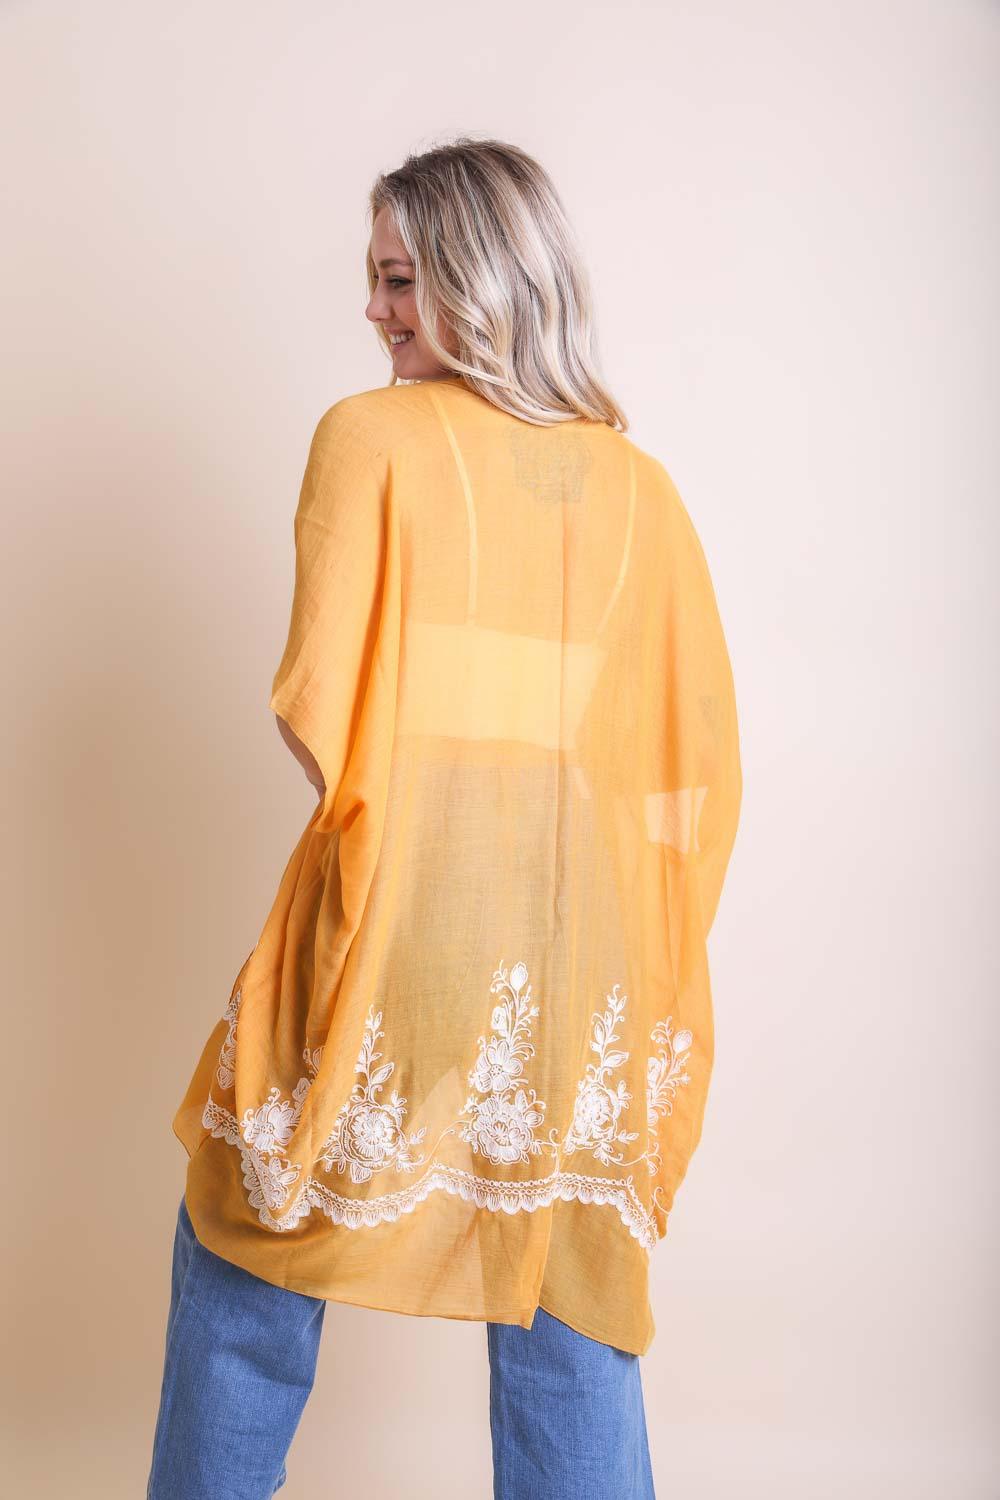 Floral Embroidered Stitched Kimono - Brand My Case